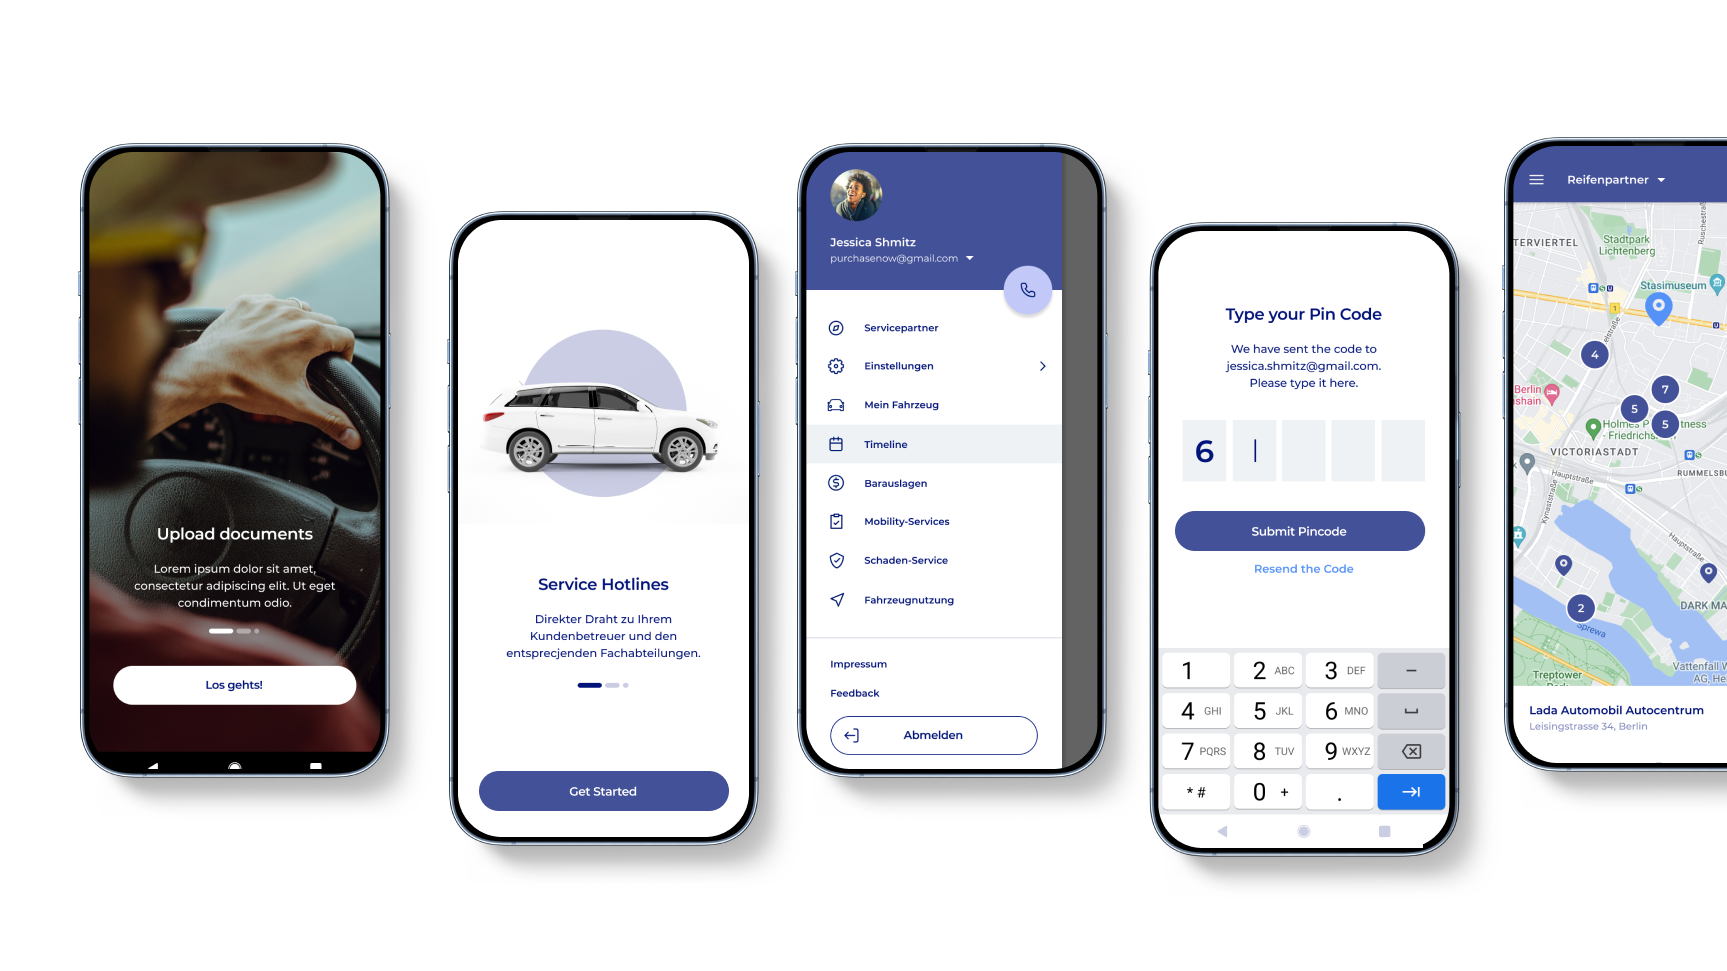 CPM launched a new app for all their drivers that was designed with customer centricity in mind.